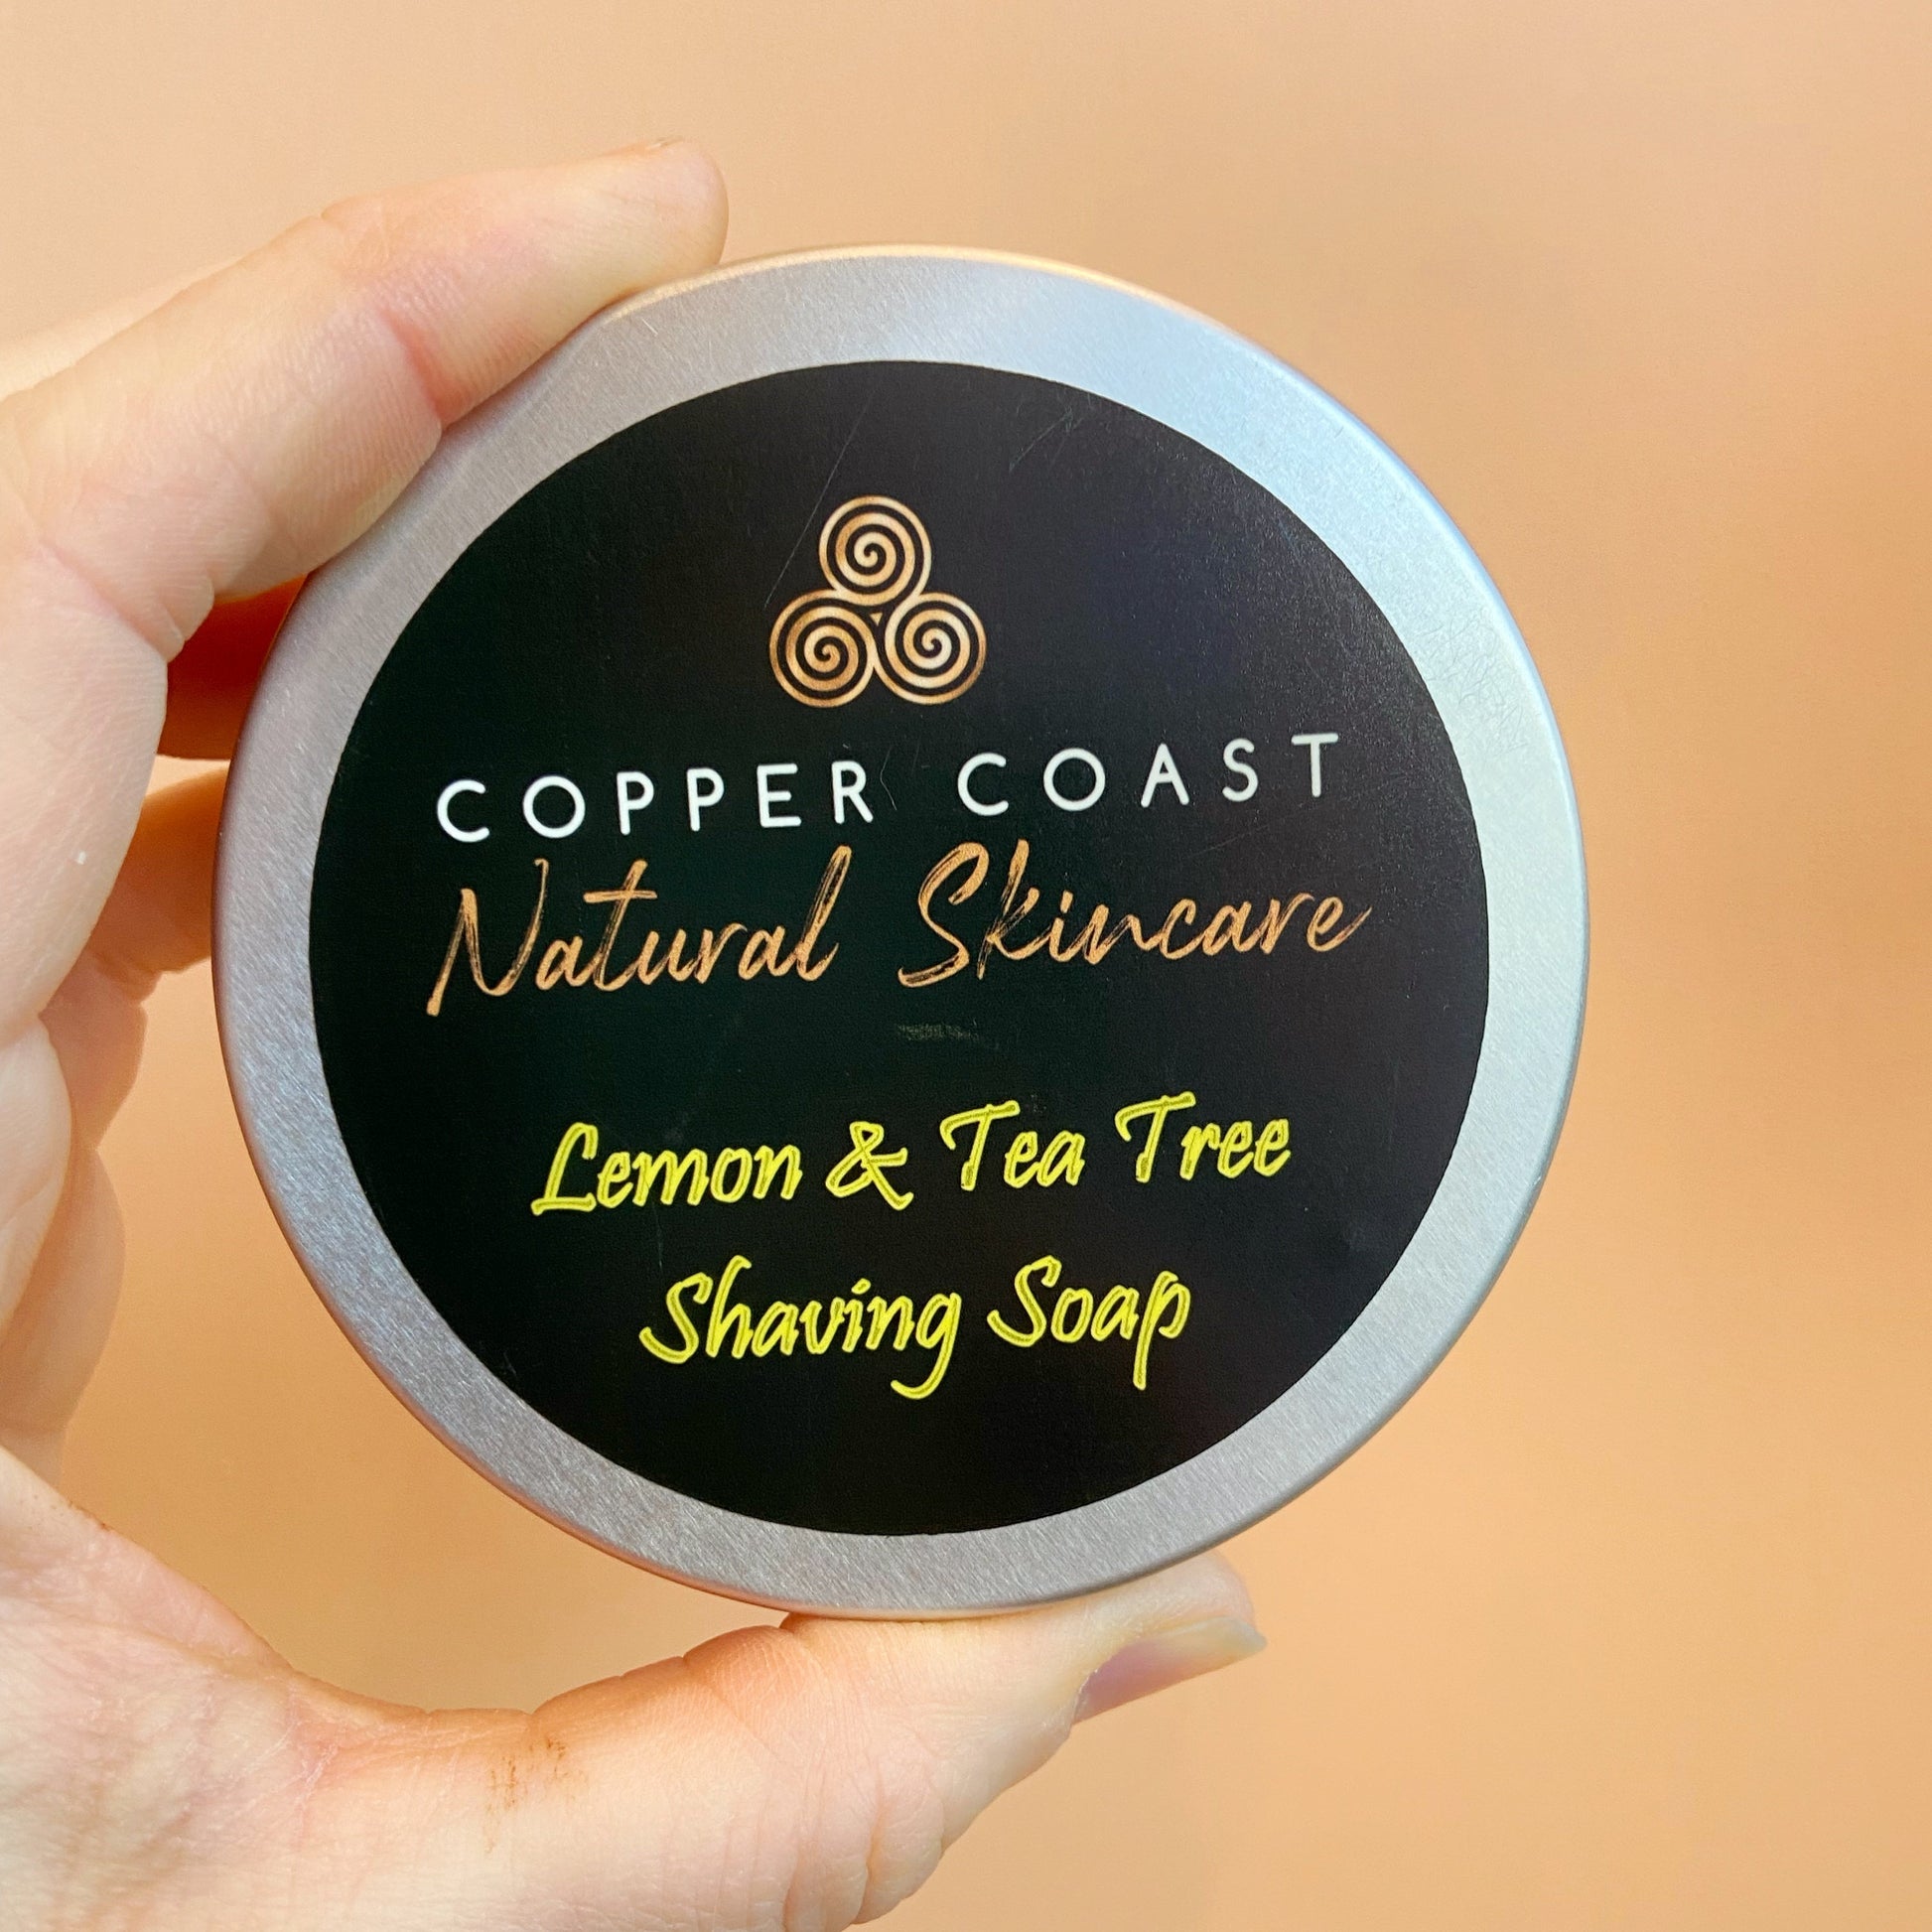 Lemon & Tea Tree Shave Soap - Luxurious and nourishing shave soap, offering an eco-friendly Shave